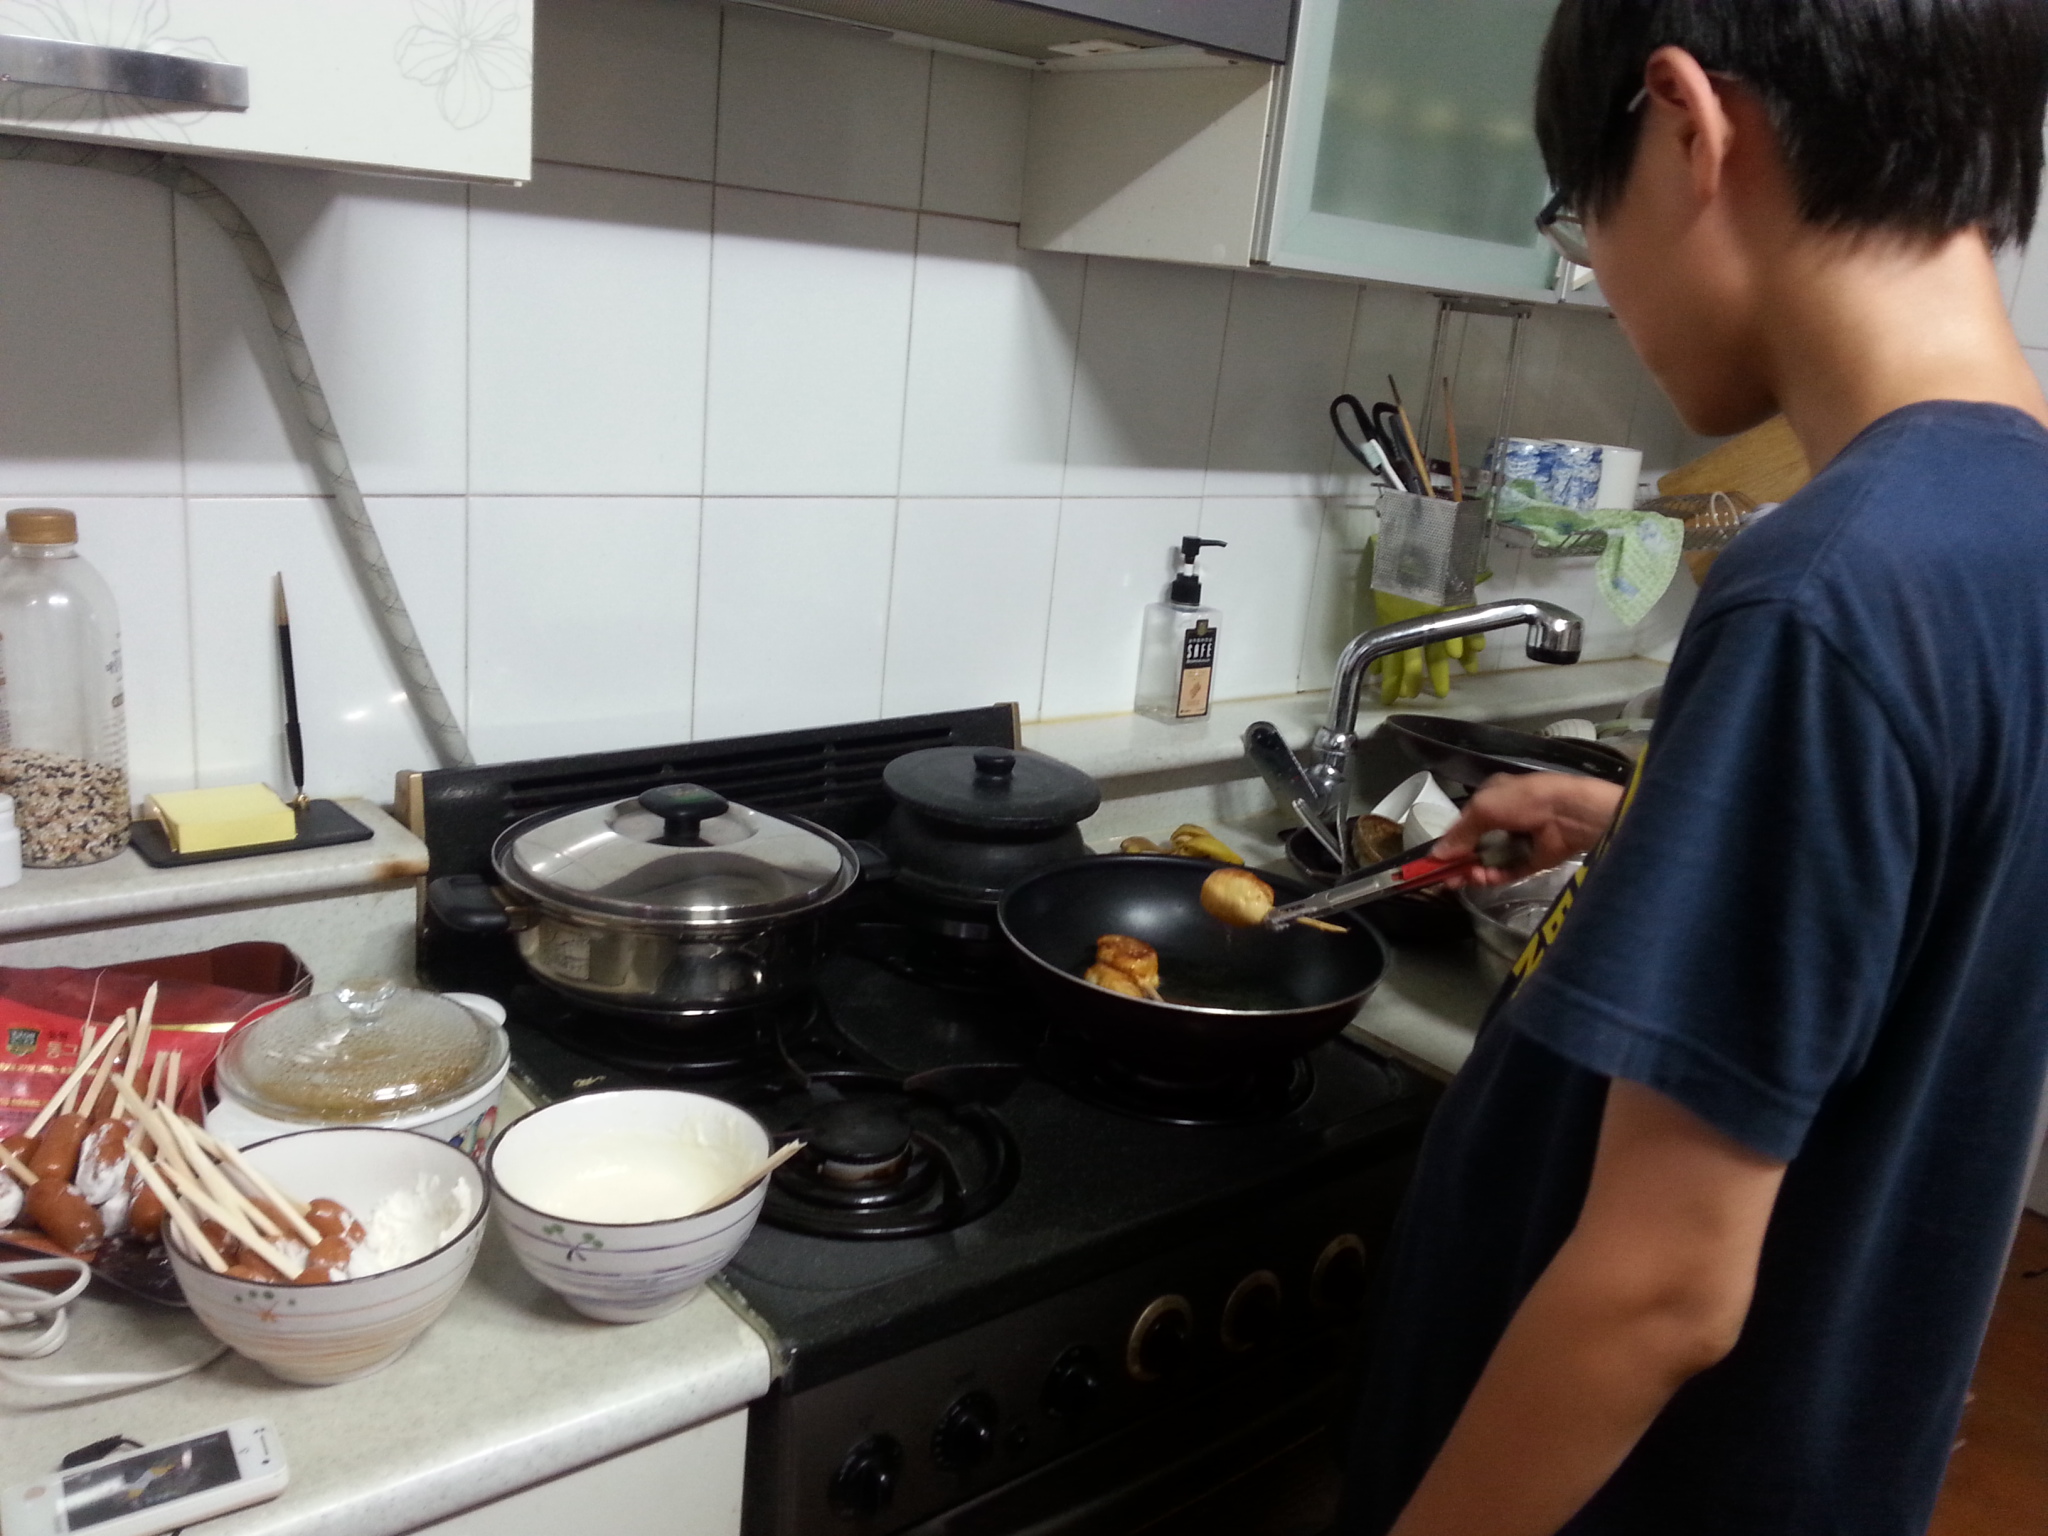 a man standing in a kitchen preparing food